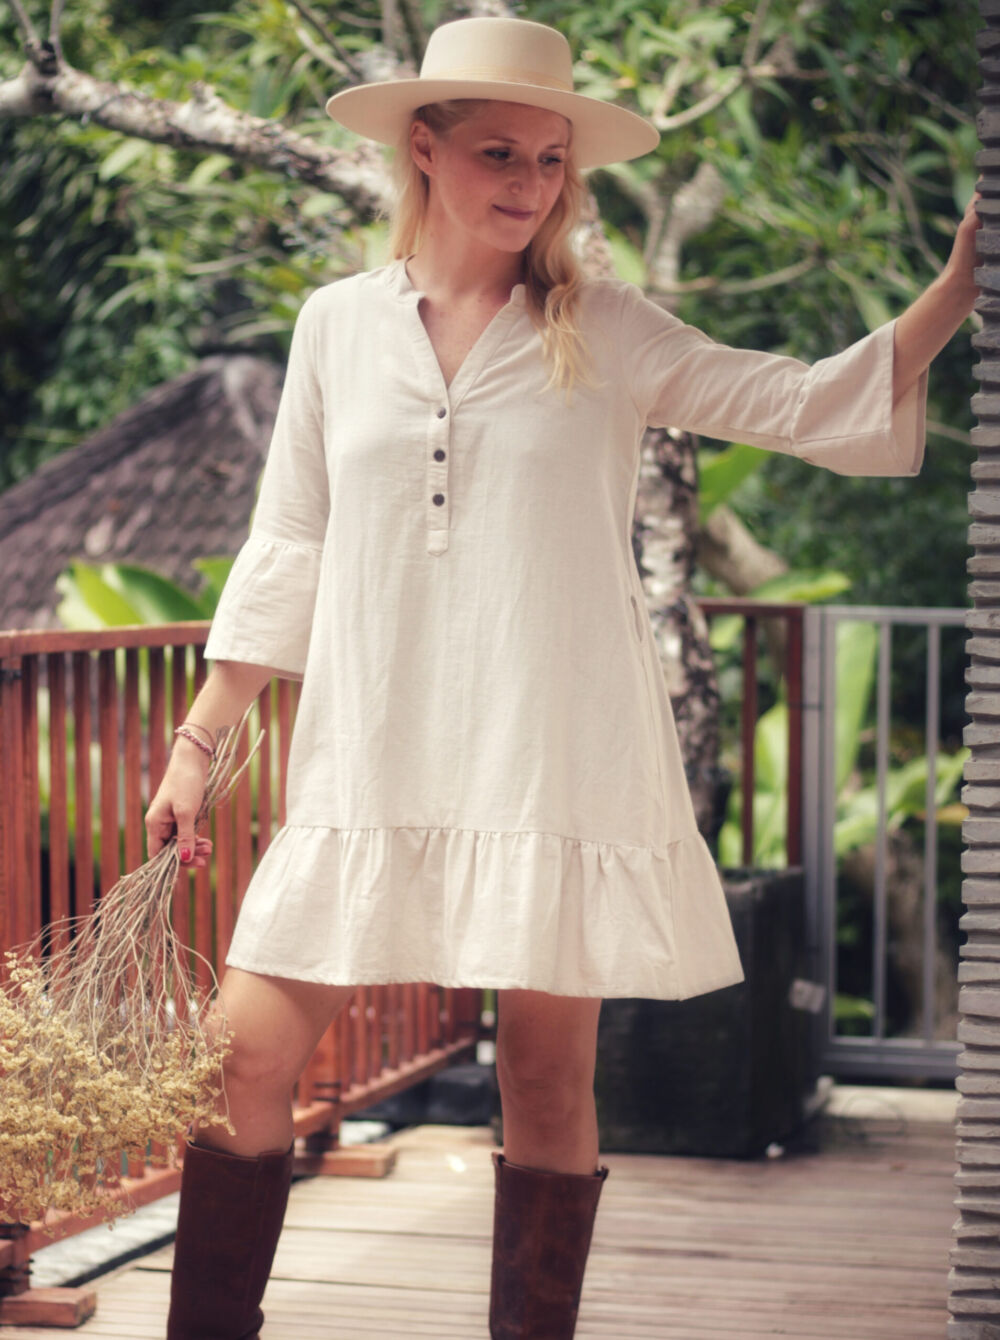 Tunic dress linen natural white for autumn and winter